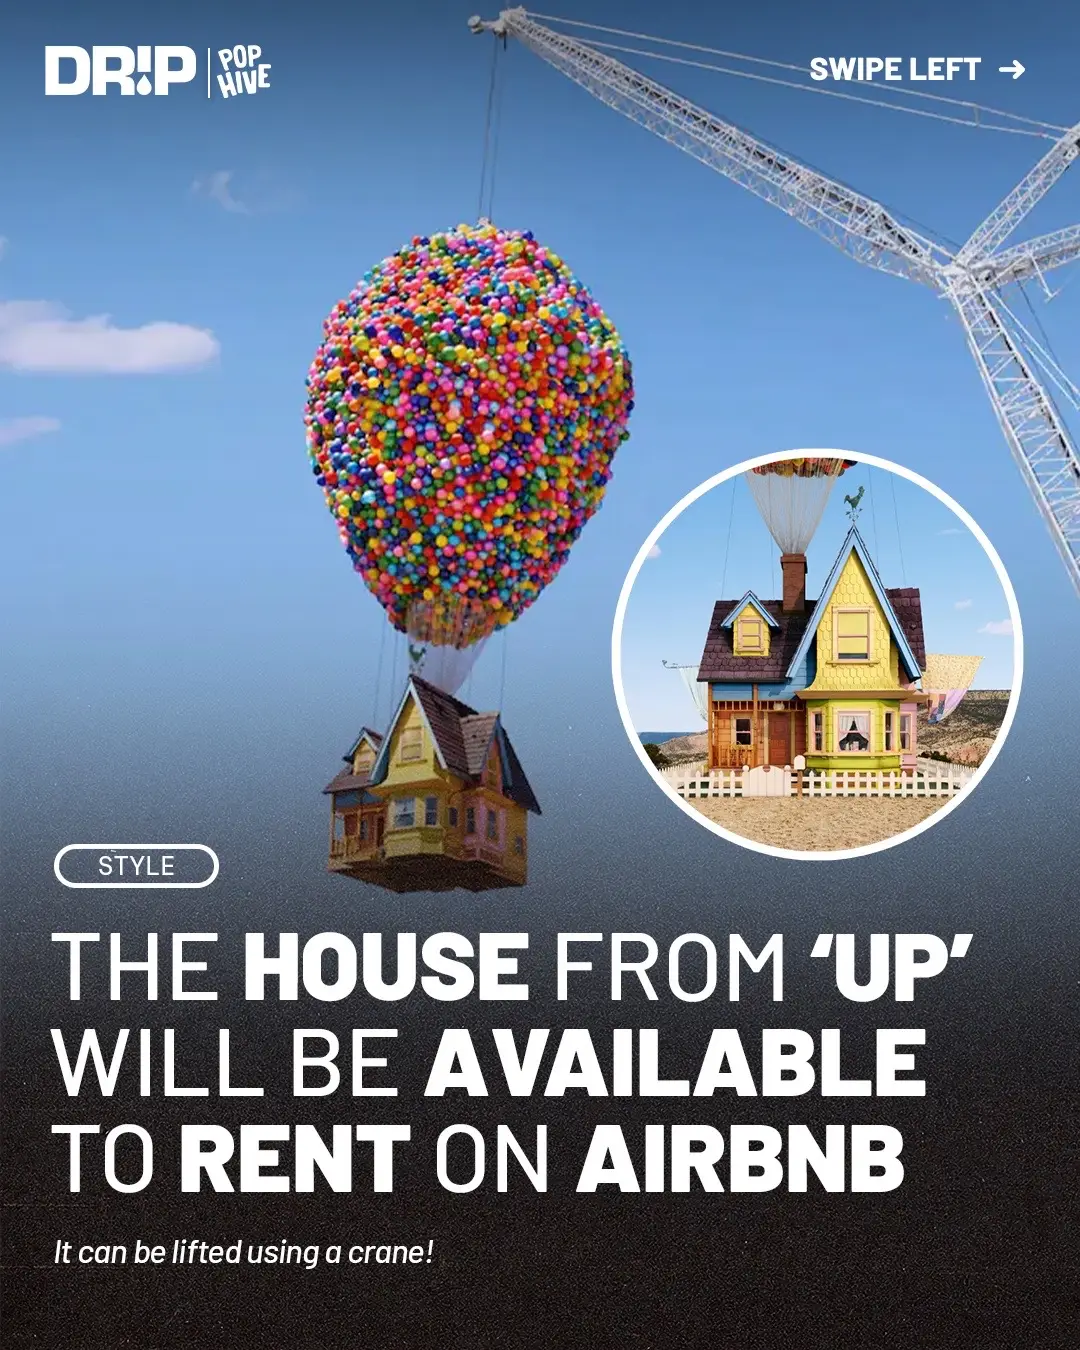 Airbnb has replicated thr house from ‘UP’, which can be lifted into the air with a crane 🎈 #up #upmovie #airbnb #interiordesign #airbnbfinds #pixar #housegoals #hypebeast 